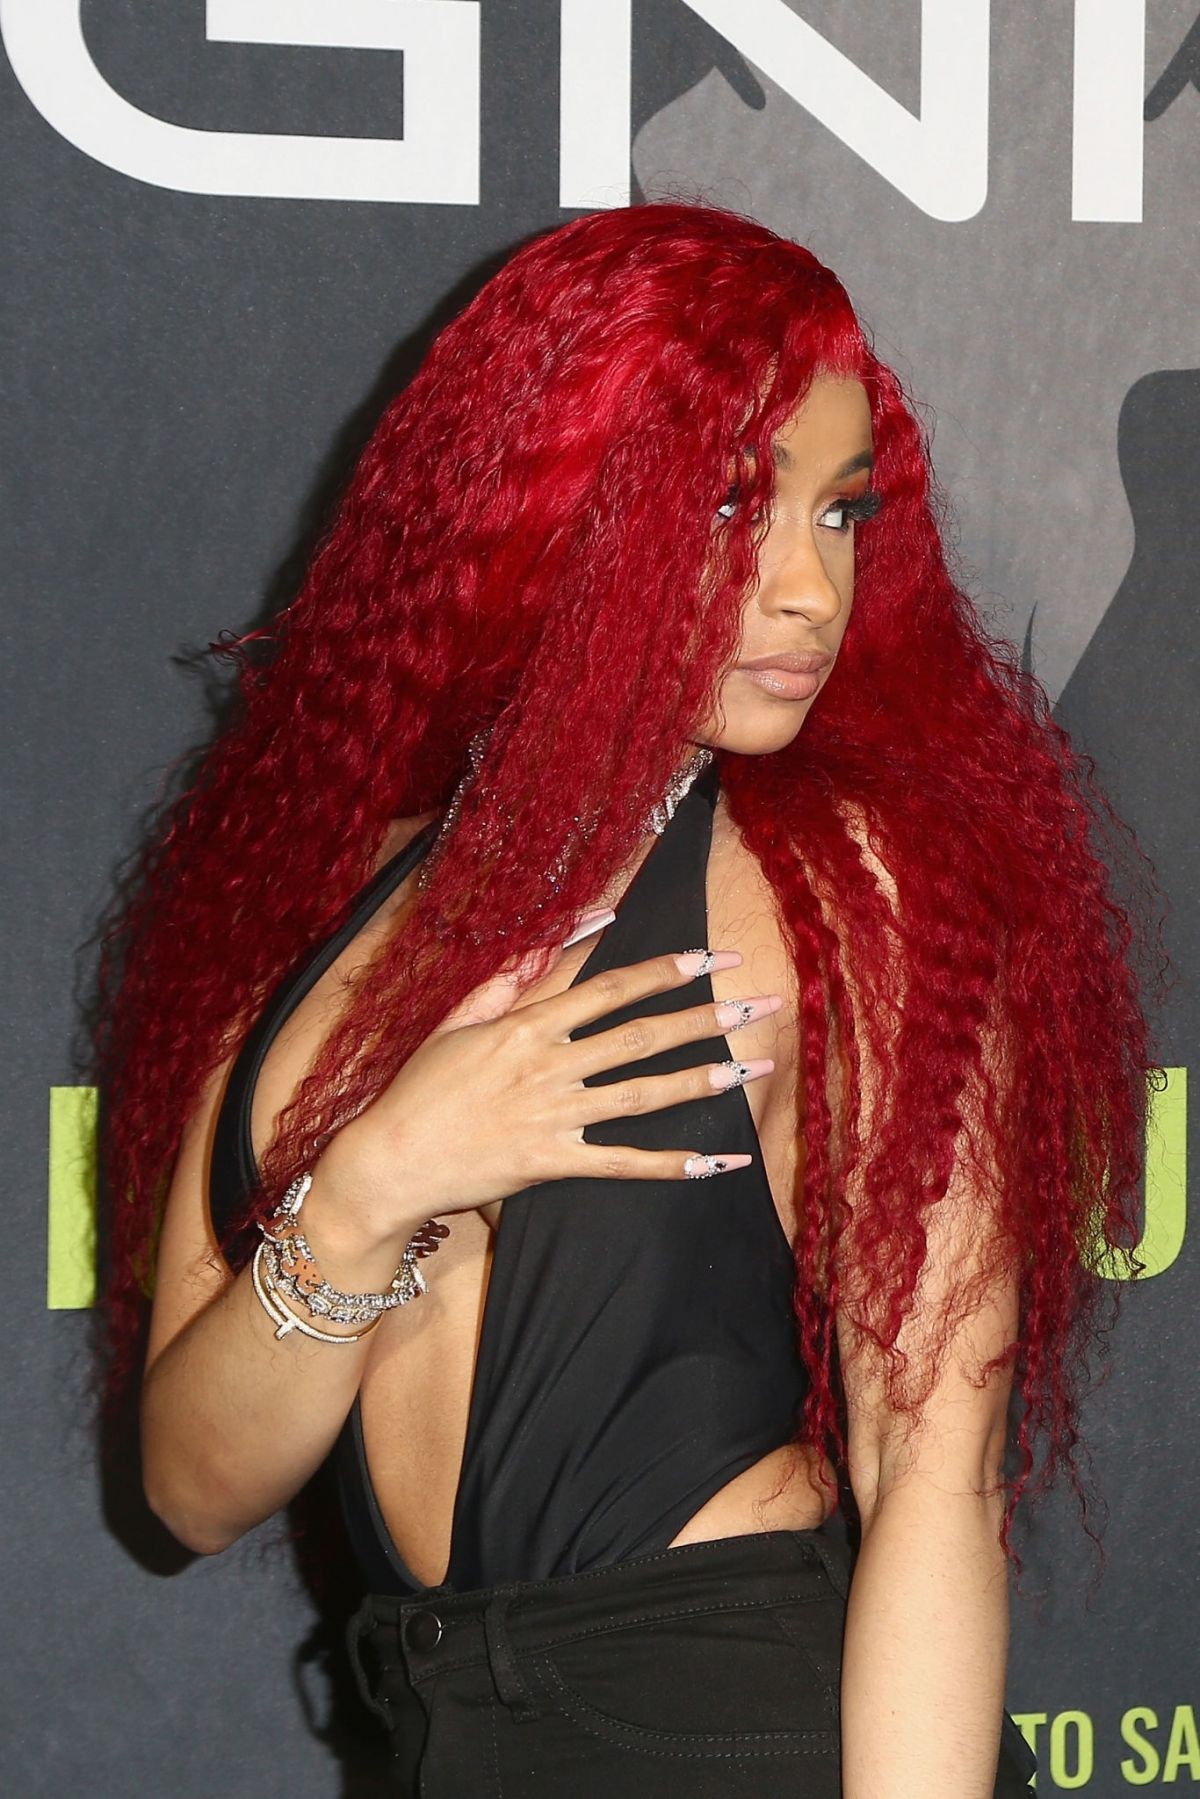 cardi-b-at-ignite-angels-and-devils-pre-valentine-s-day-party-in-bel-air-02-13-2019-7.jpg